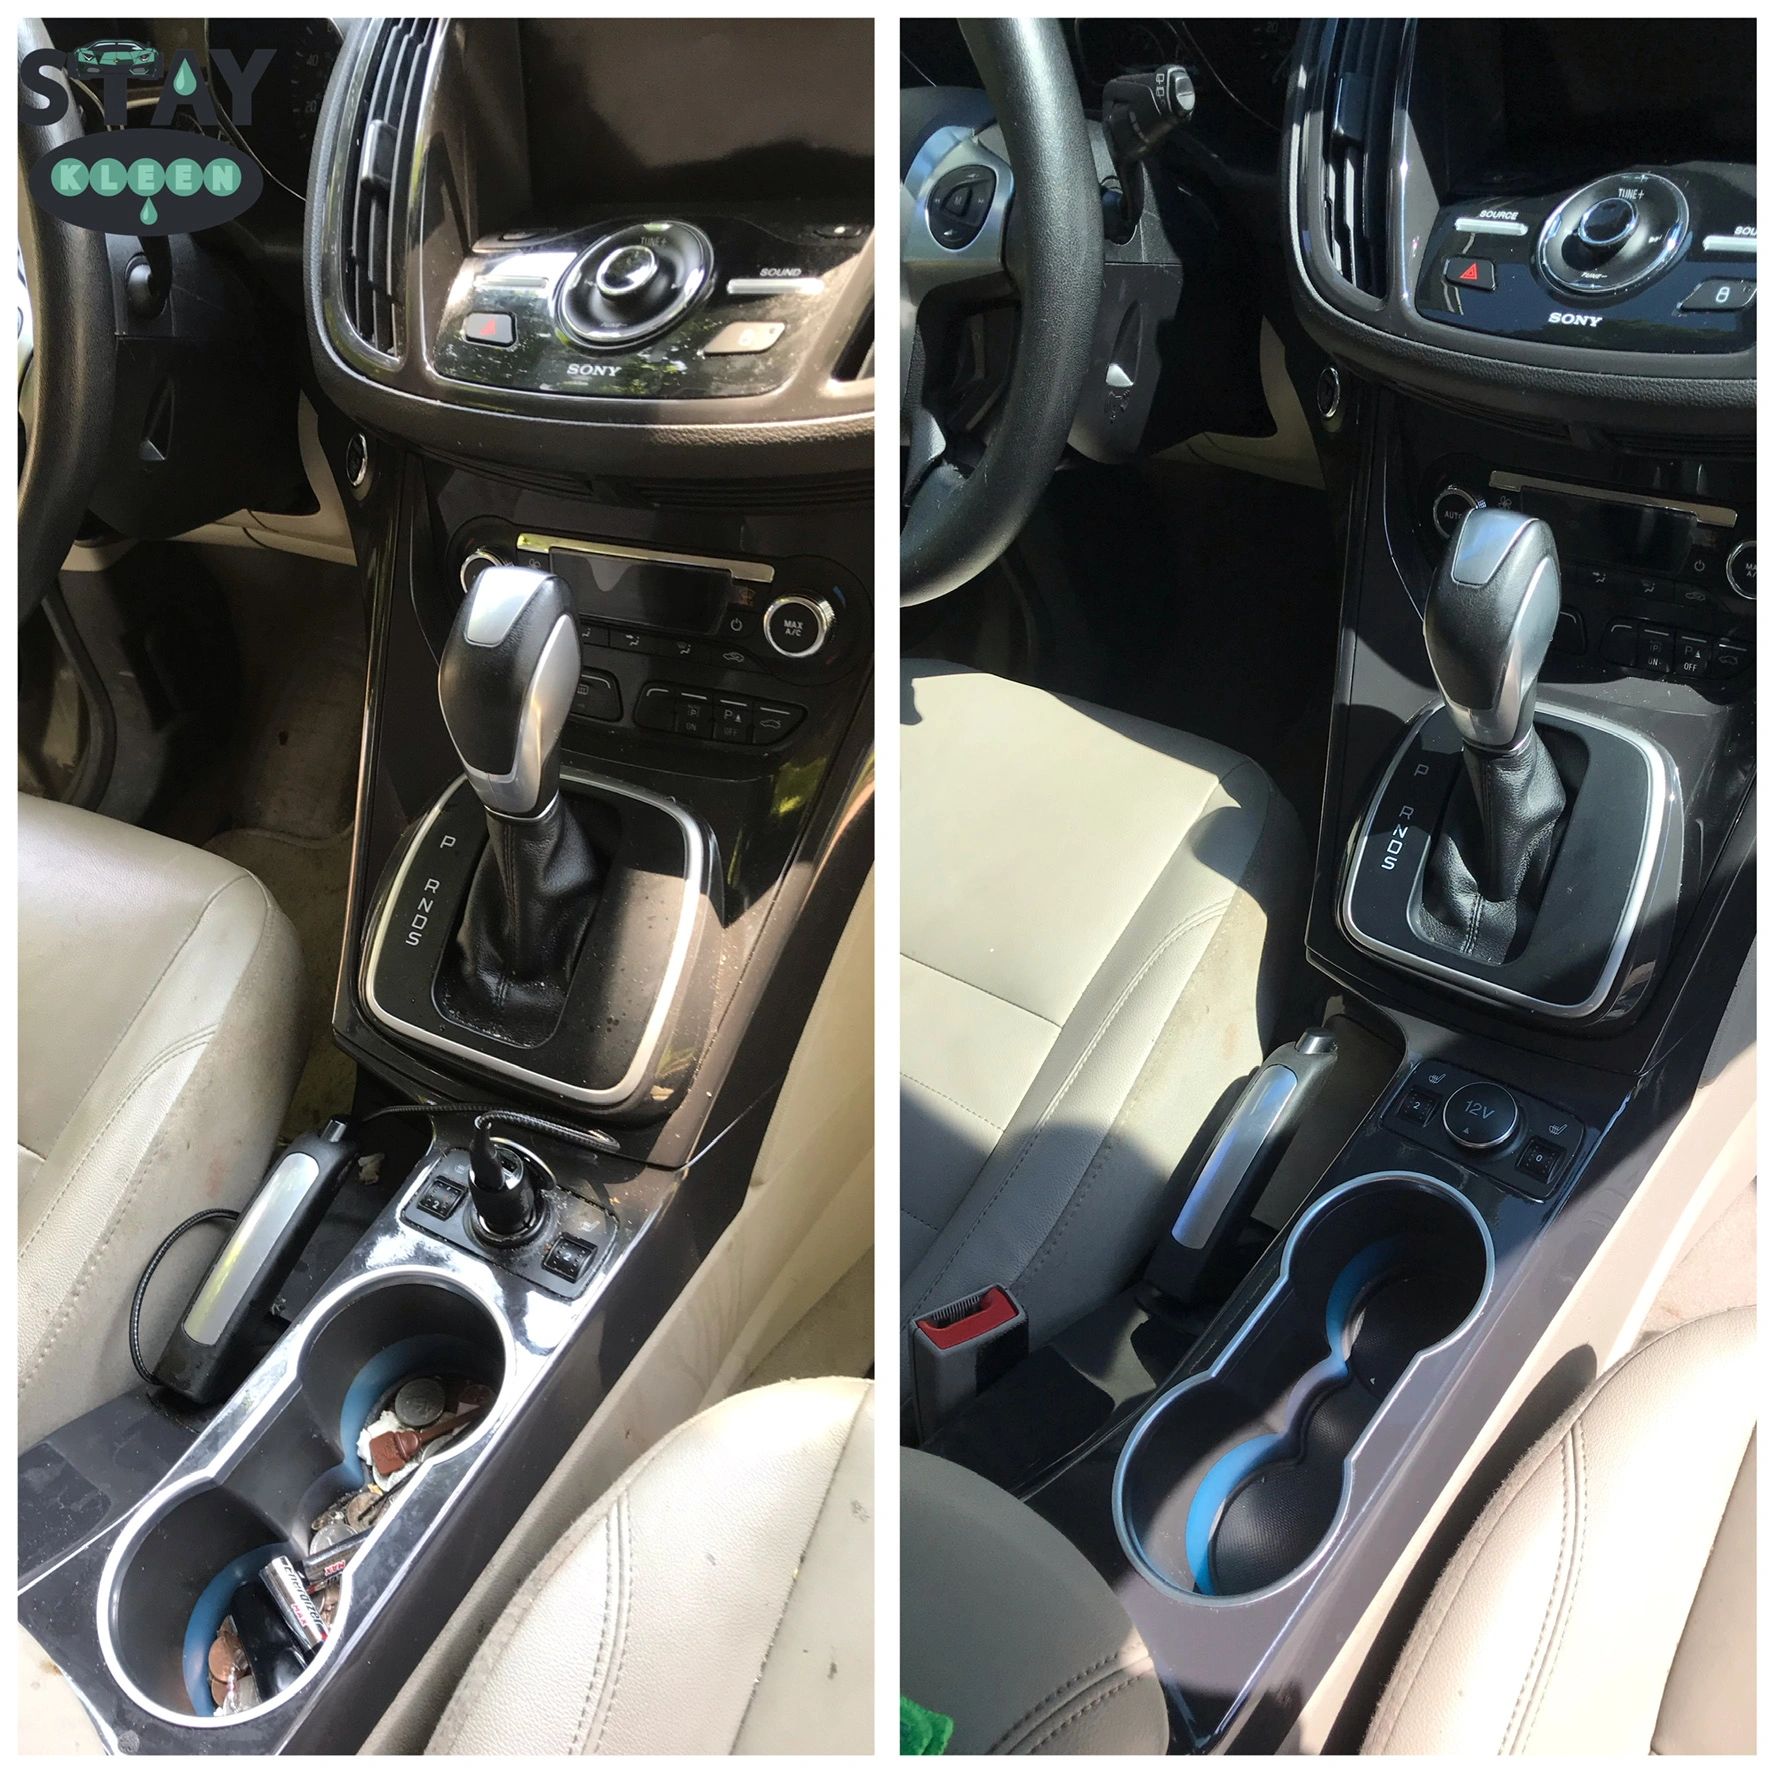 Ford Escape Center console cleaned